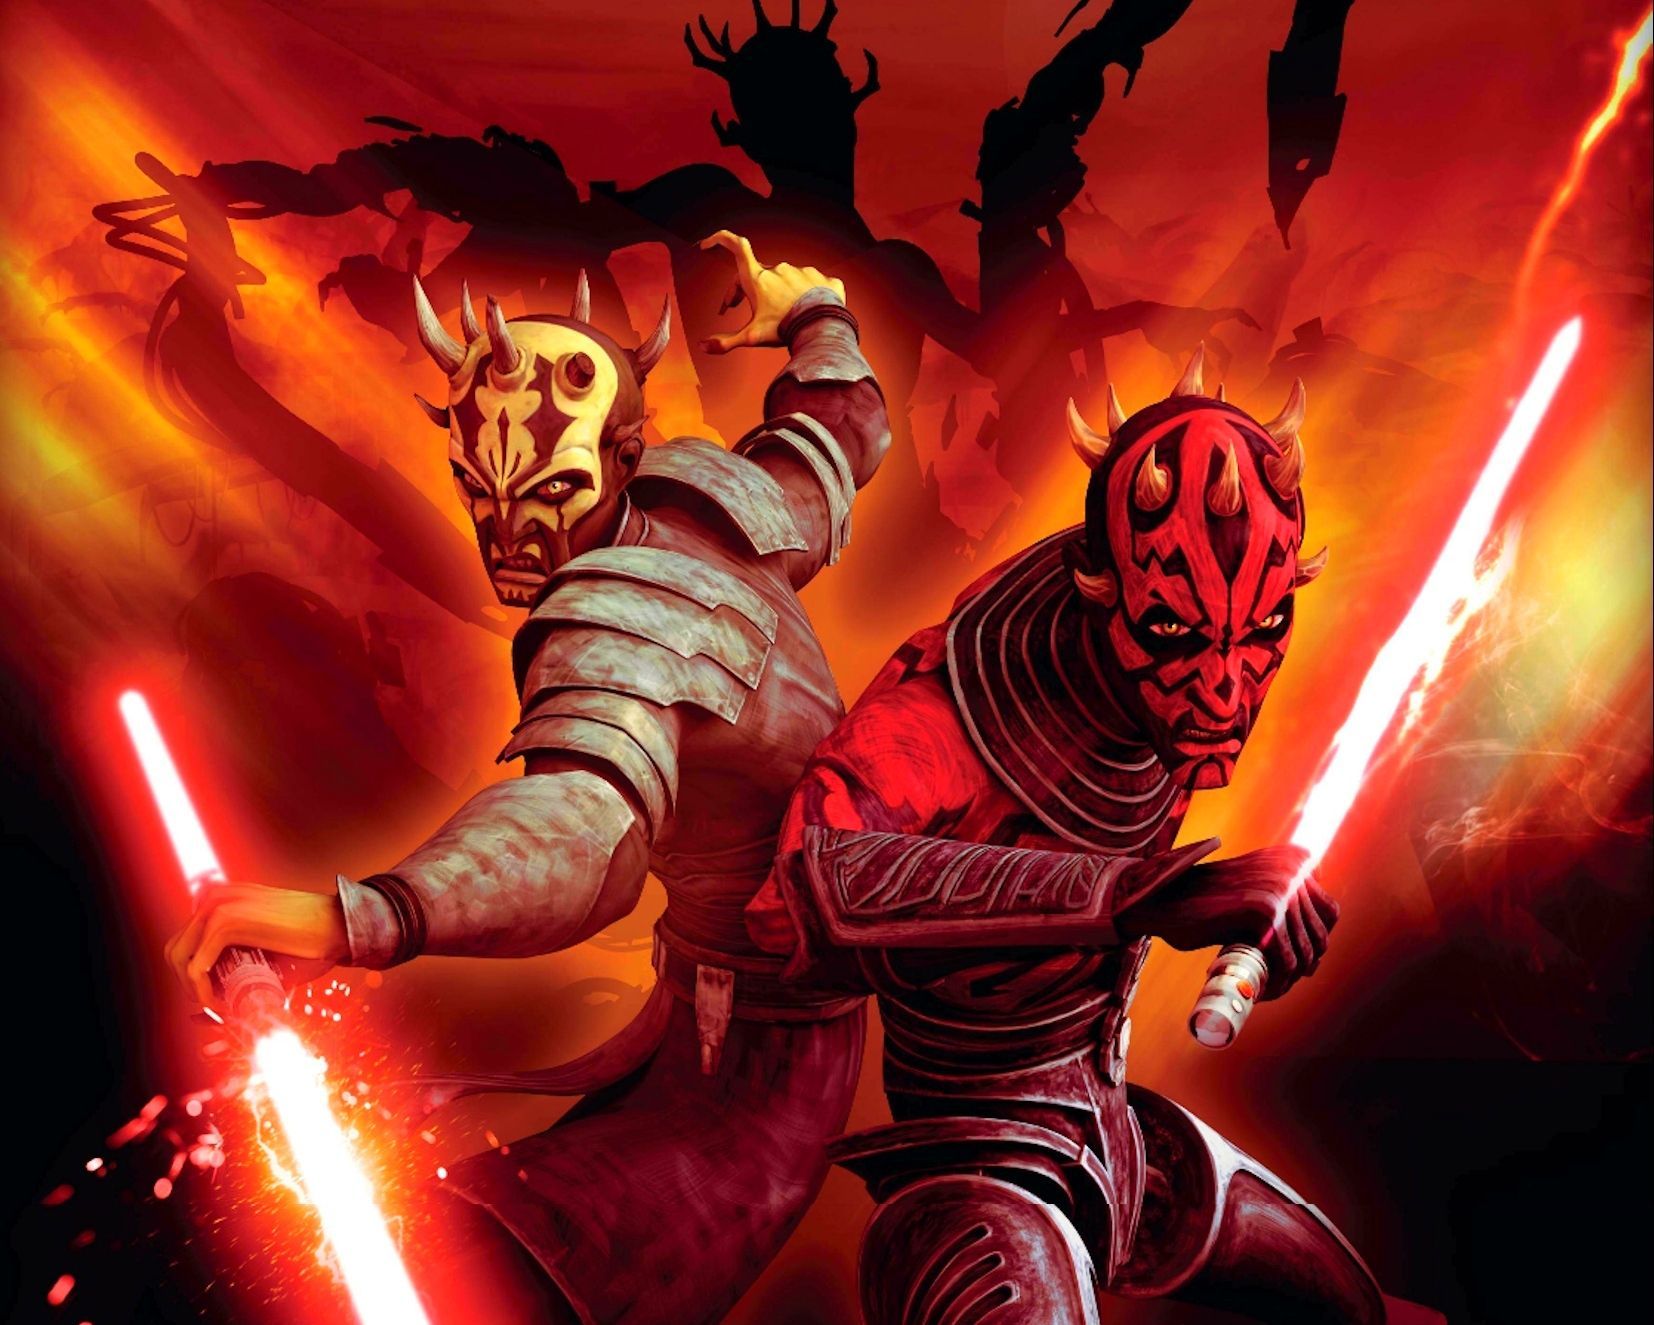 Maul and Savage from The Clone Wars. Star wars poster, Star wars sith, Star wars poster art